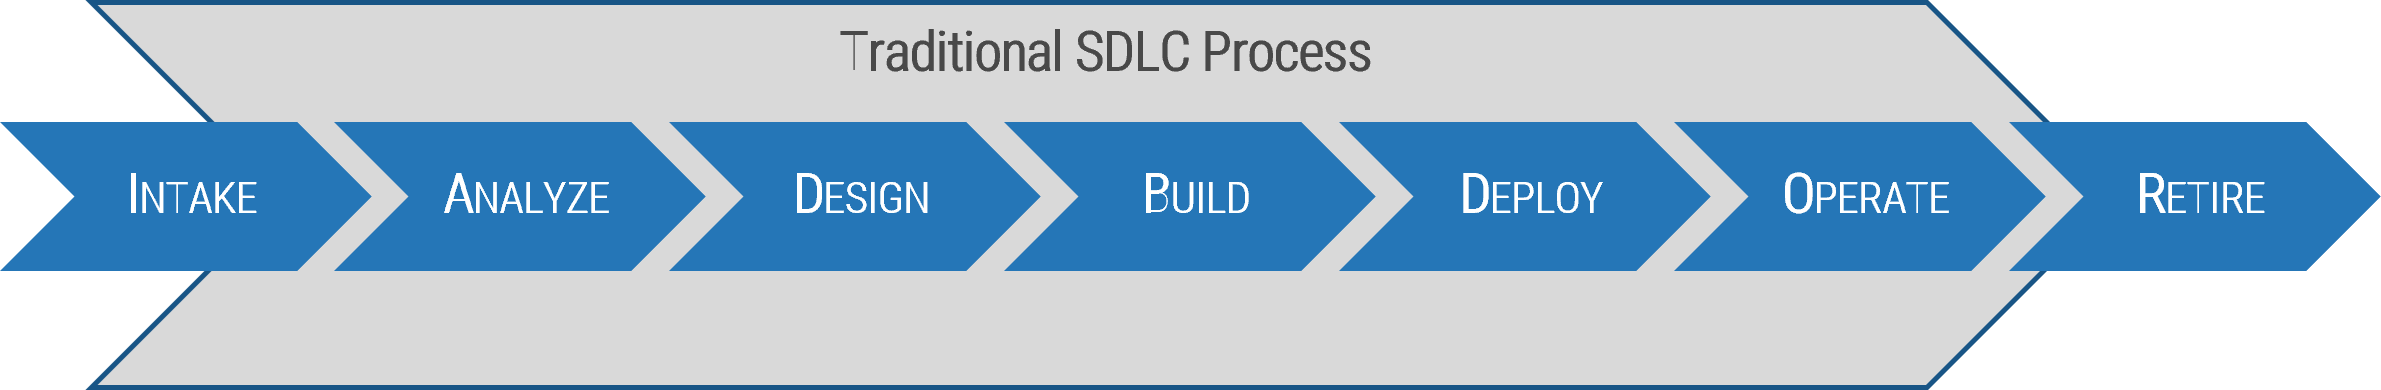 The Traditional SDLC Process with steps 'Intake', 'Analyze', 'Design', 'Build', 'Deploy', 'Operate', 'Retire'.